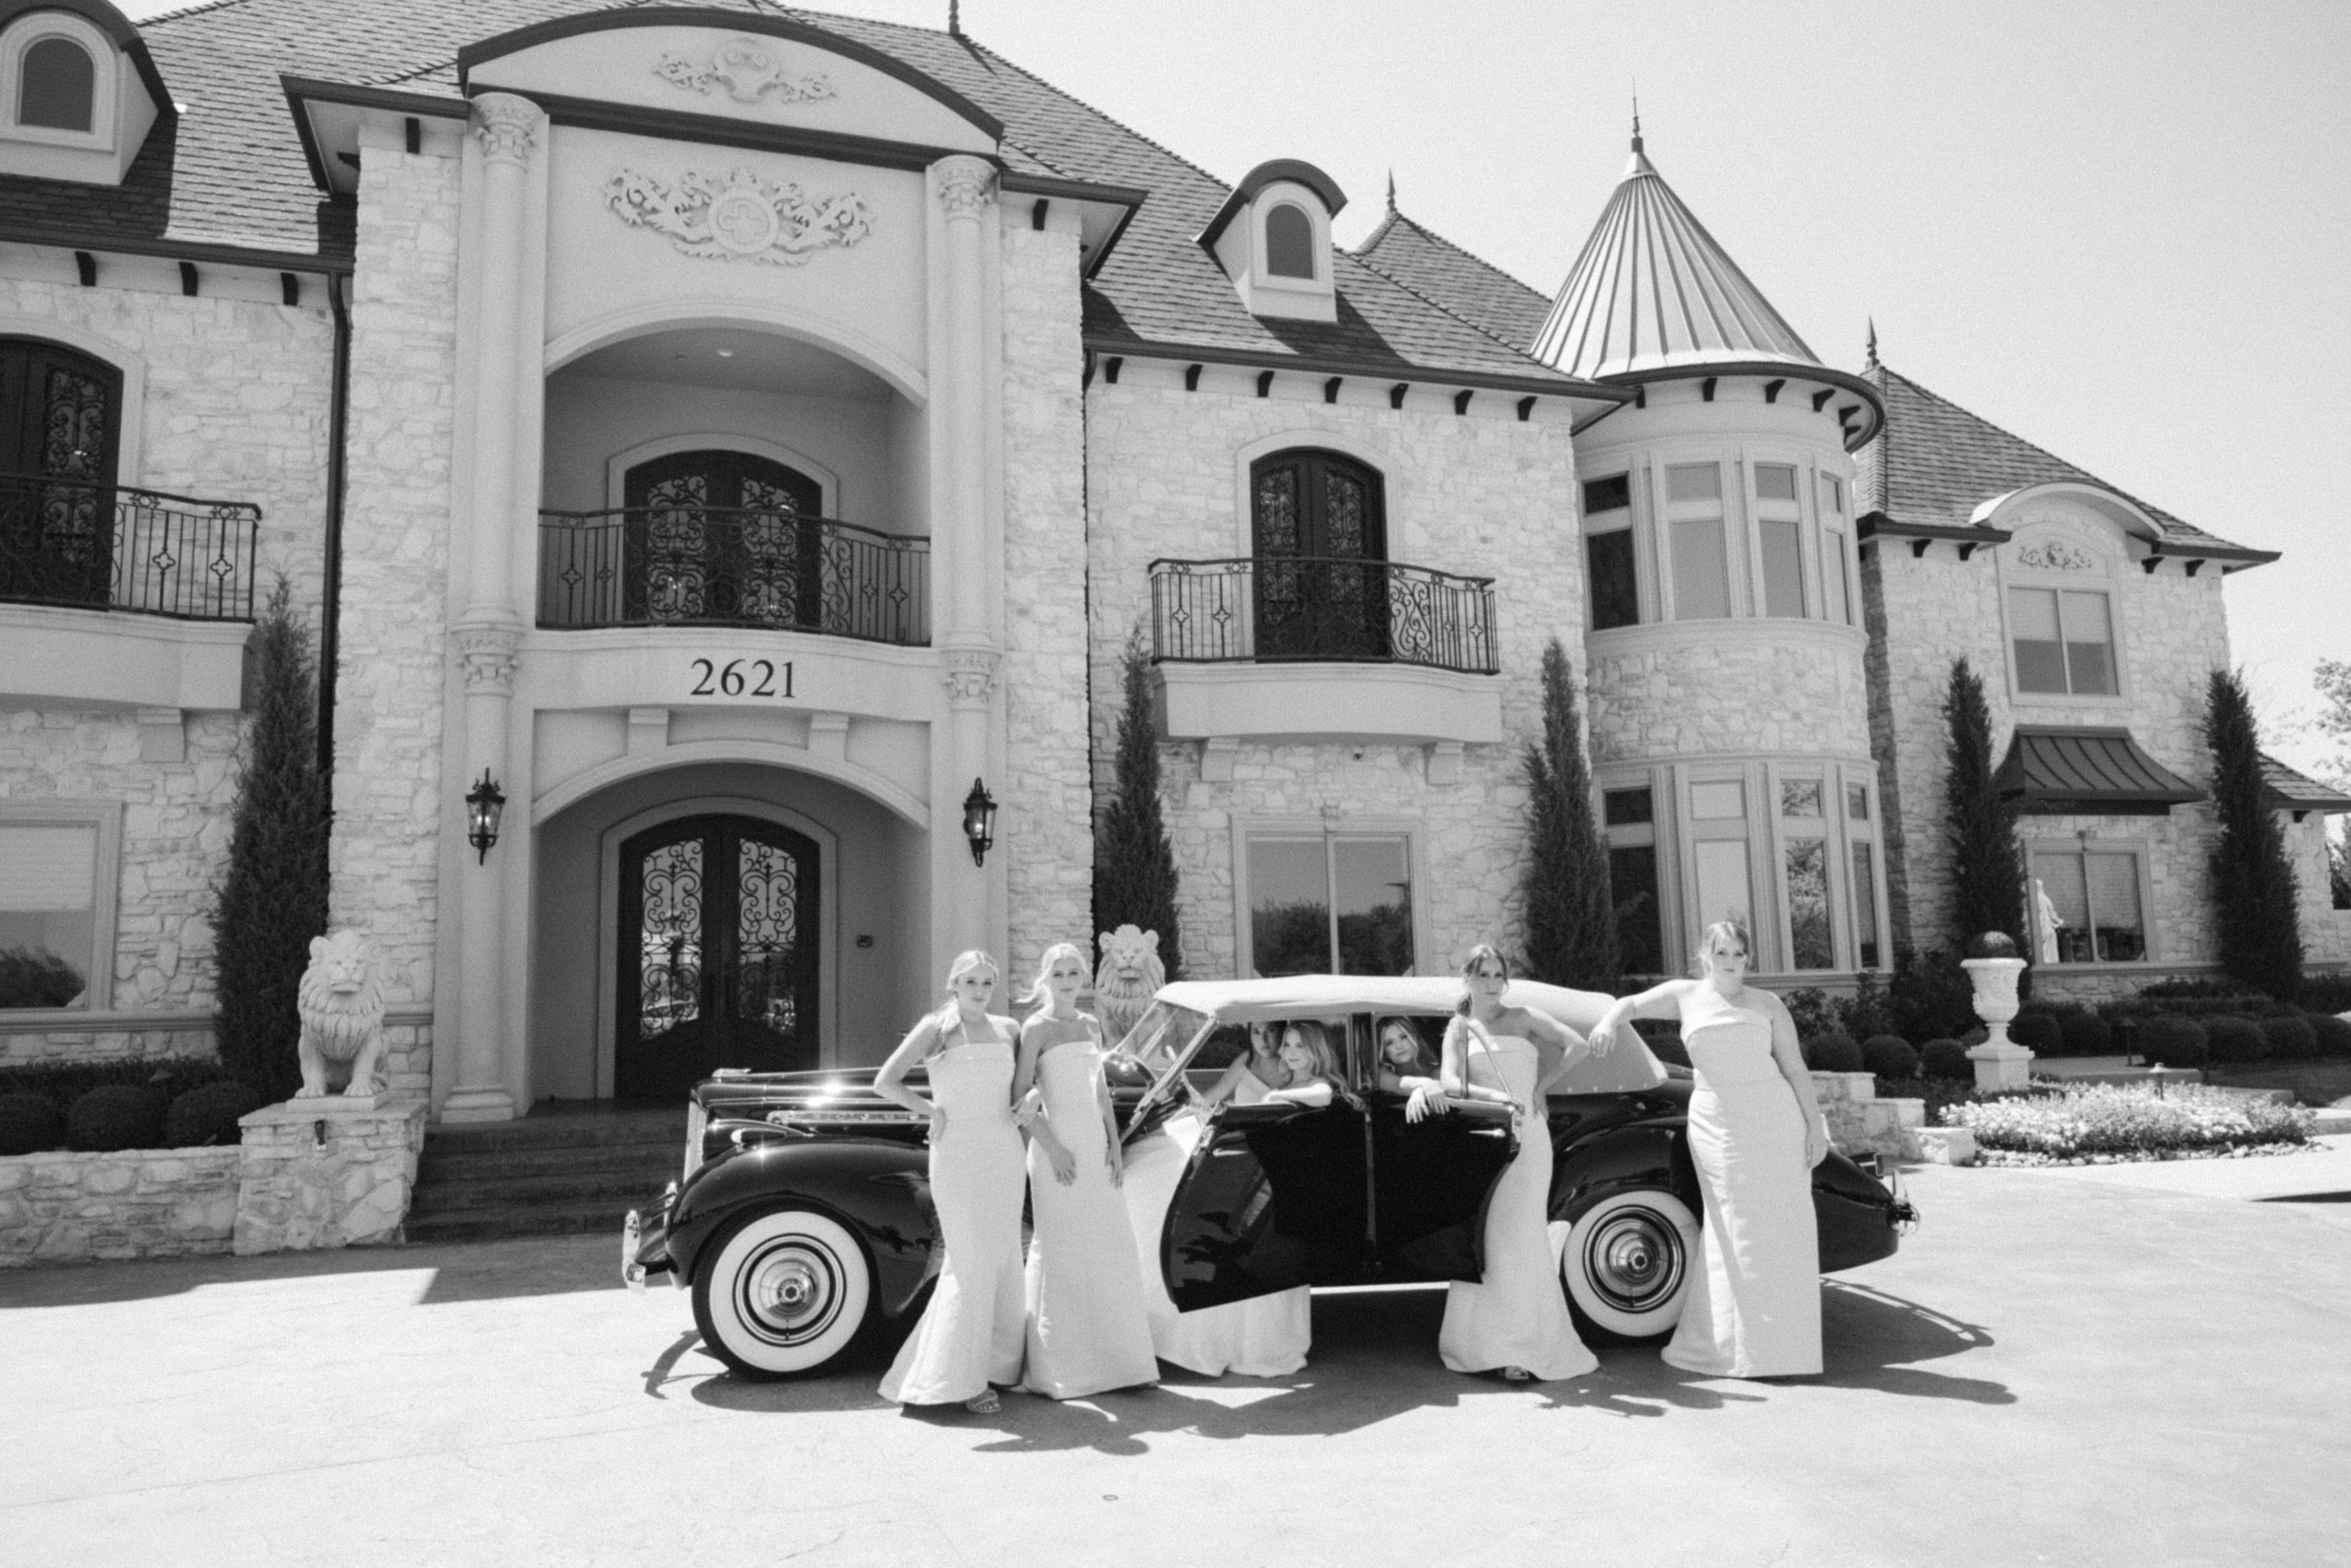 Bridesmaids and bride in a vogue like photo shoot on her wedding day at Knotting Hill Place done in black and white around a vintage car.